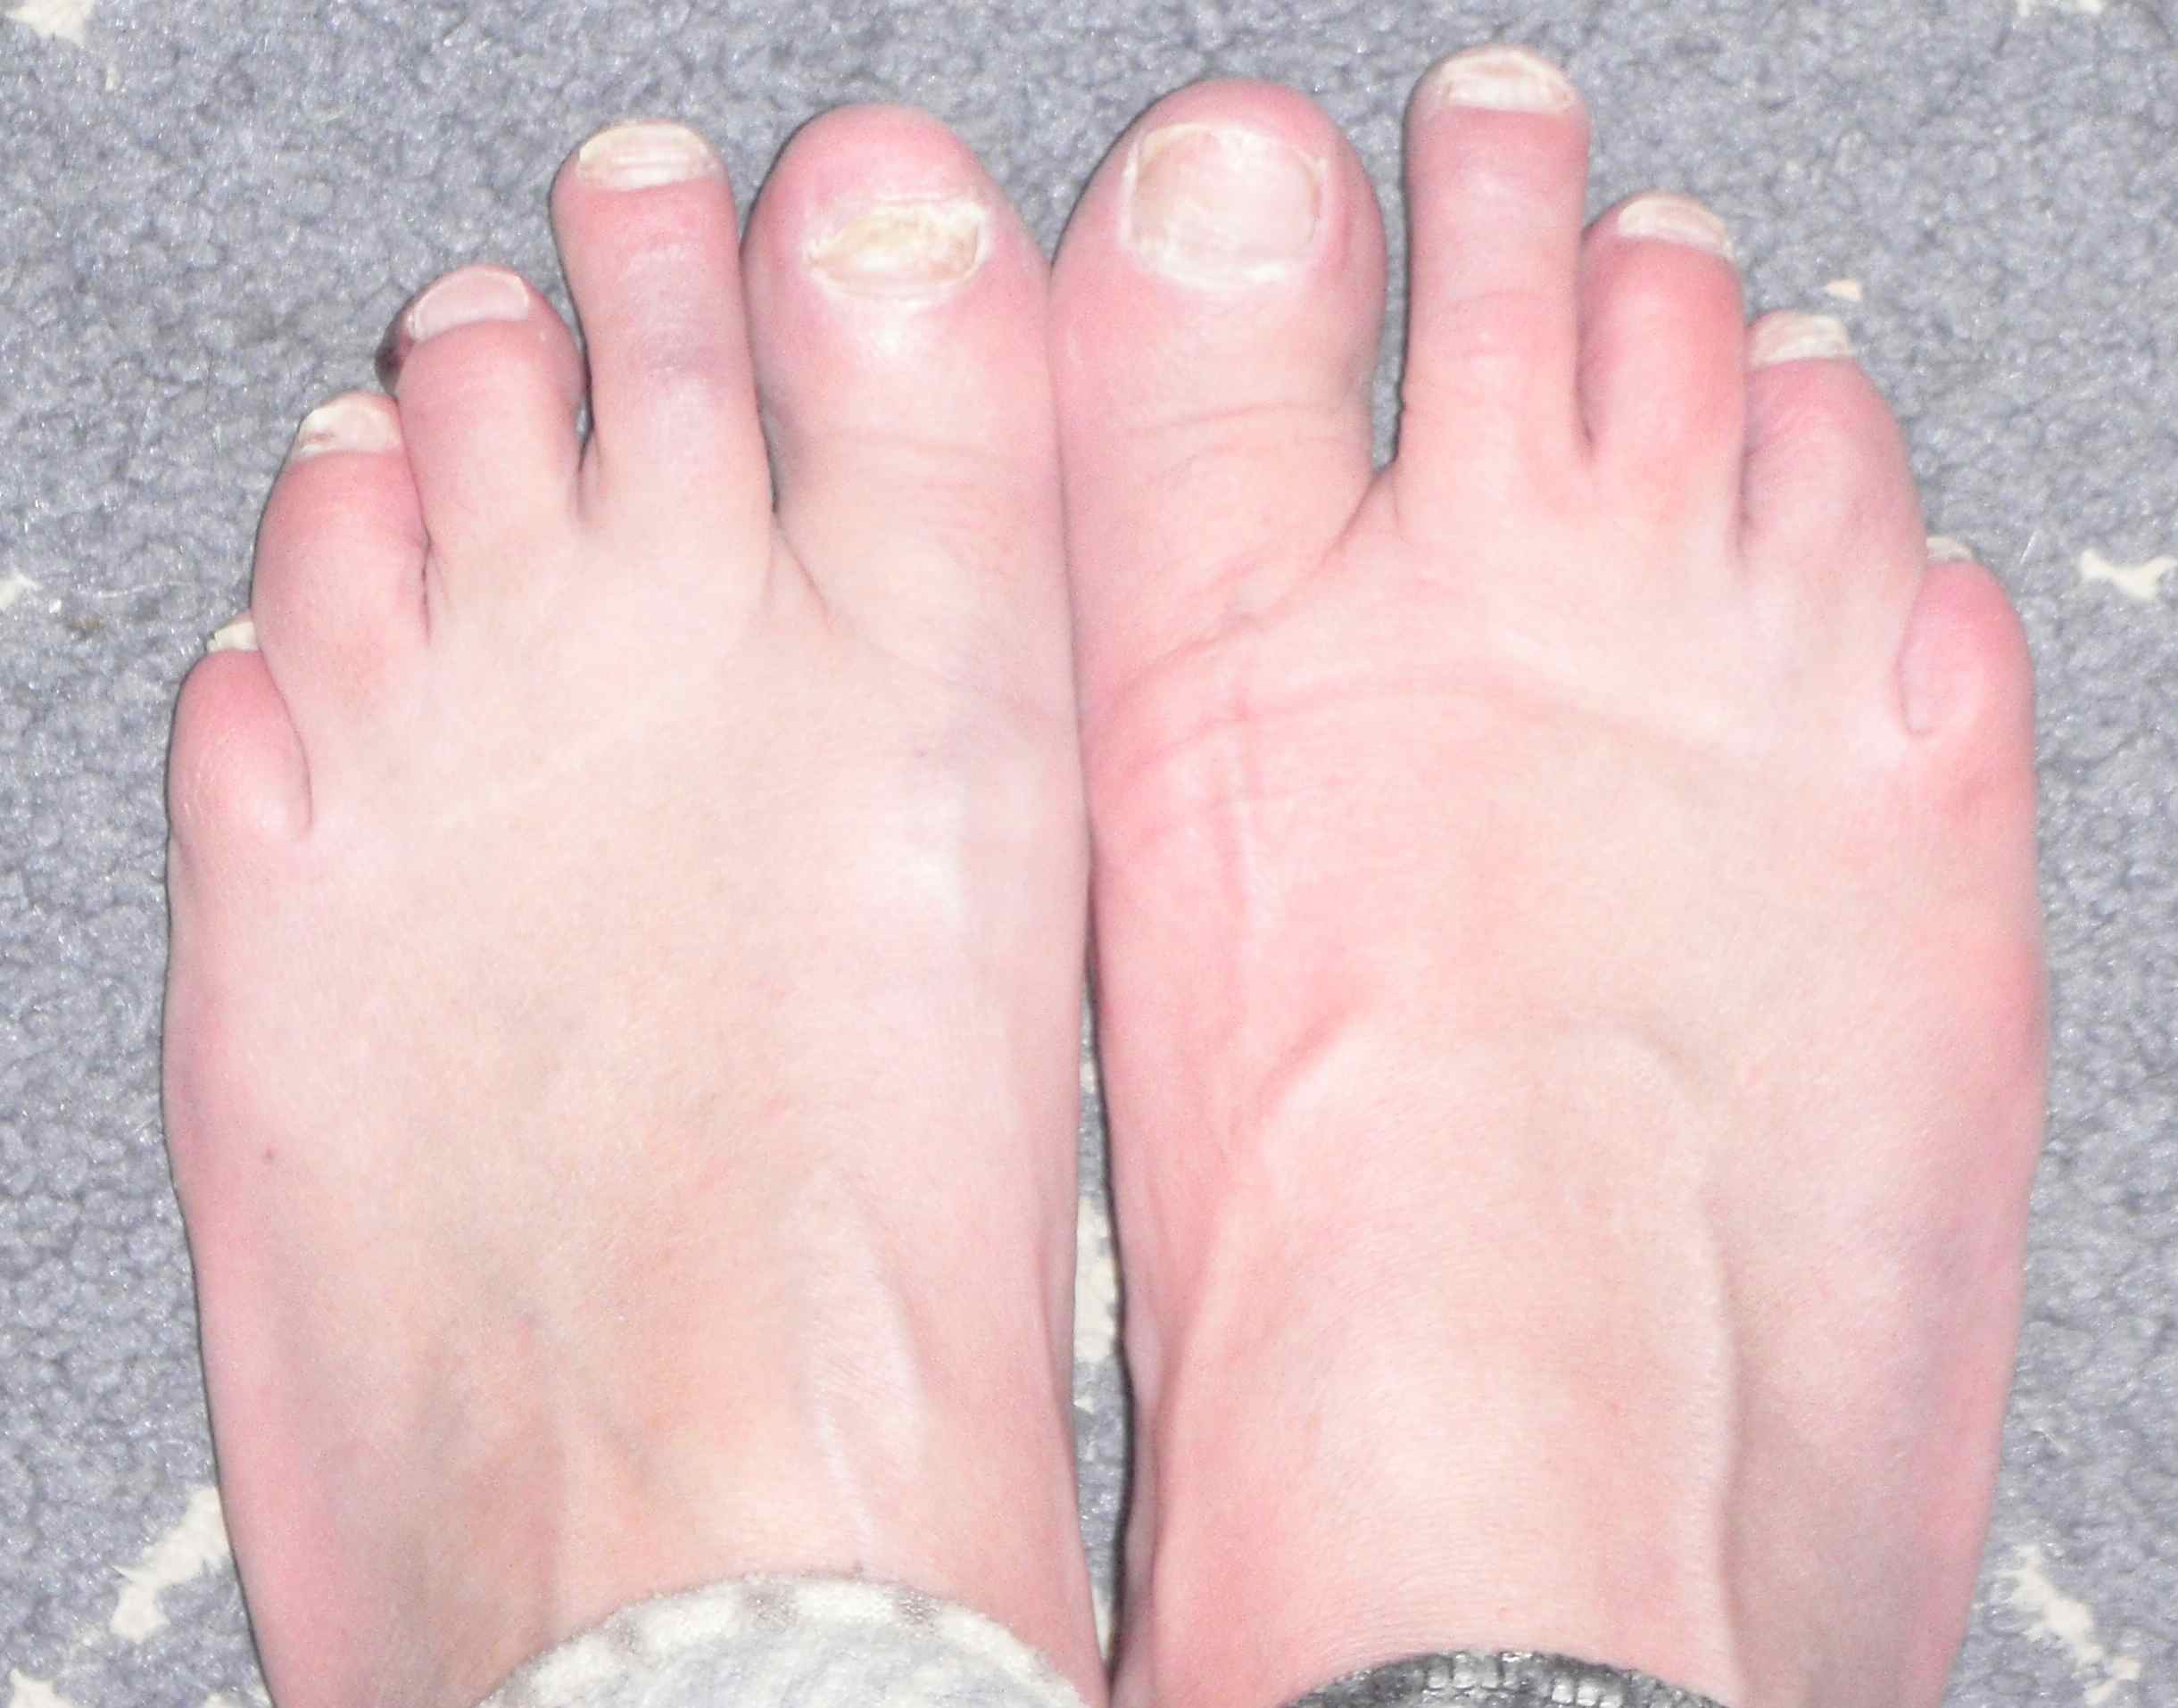 foot fungus blisters #10